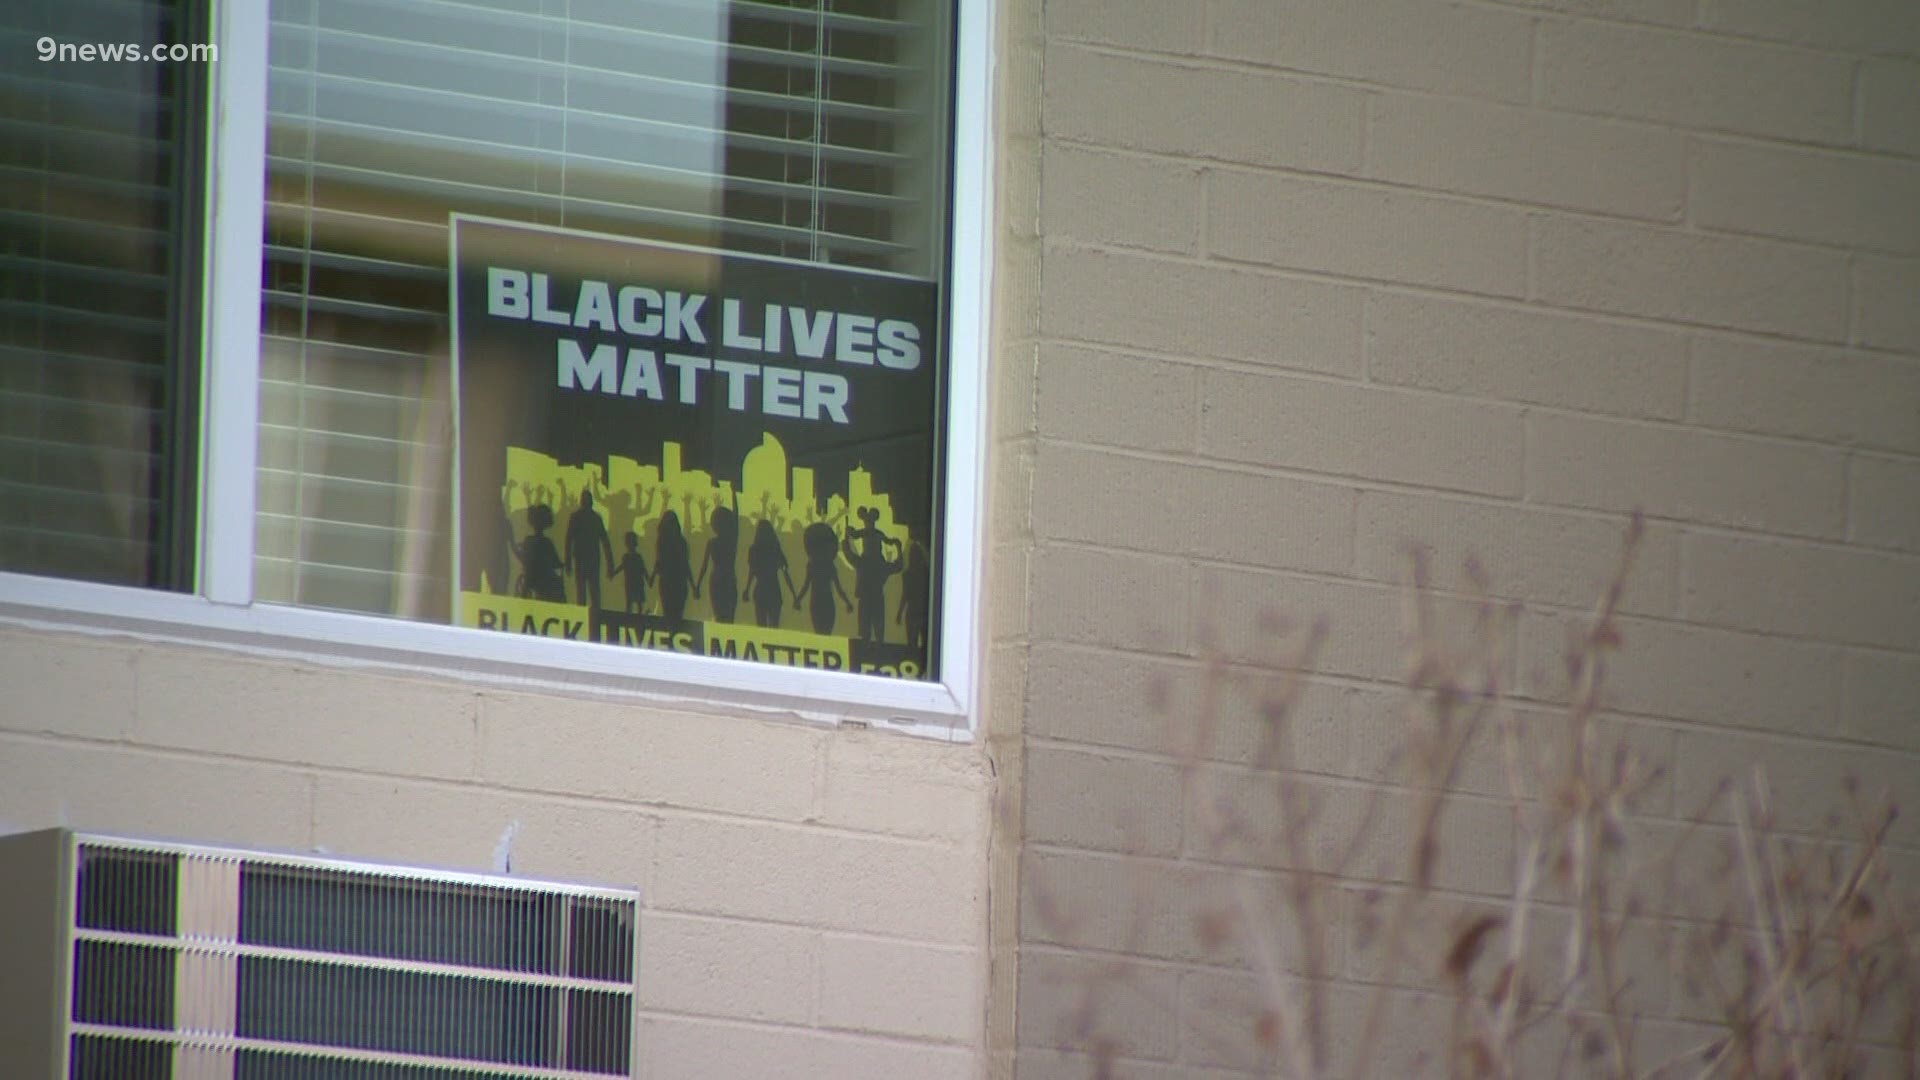 The Black Lives Matter sign she hung in her window two years ago is getting more attention than ever before. It's not the kind of attention she wanted.